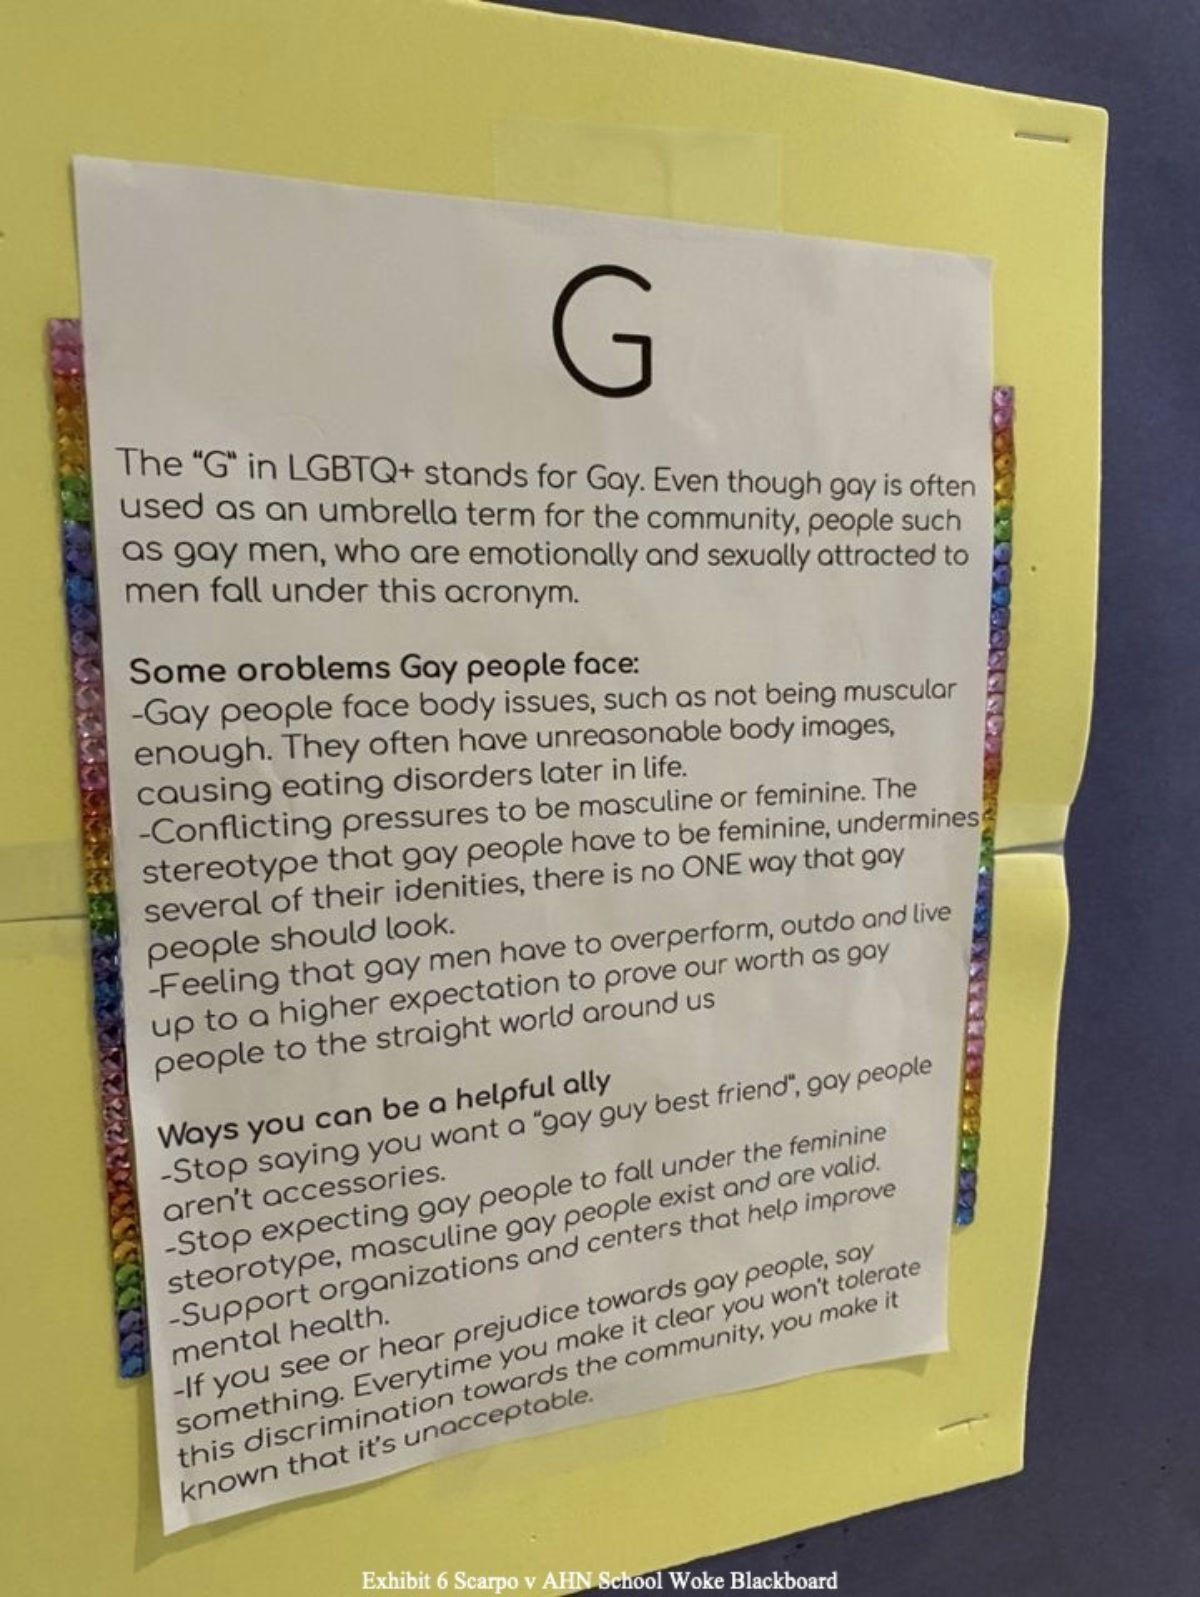 “G” poster on display at the Academy of the Holy Names. Courtesy of Adam Levine from the lawsuit exhibits.